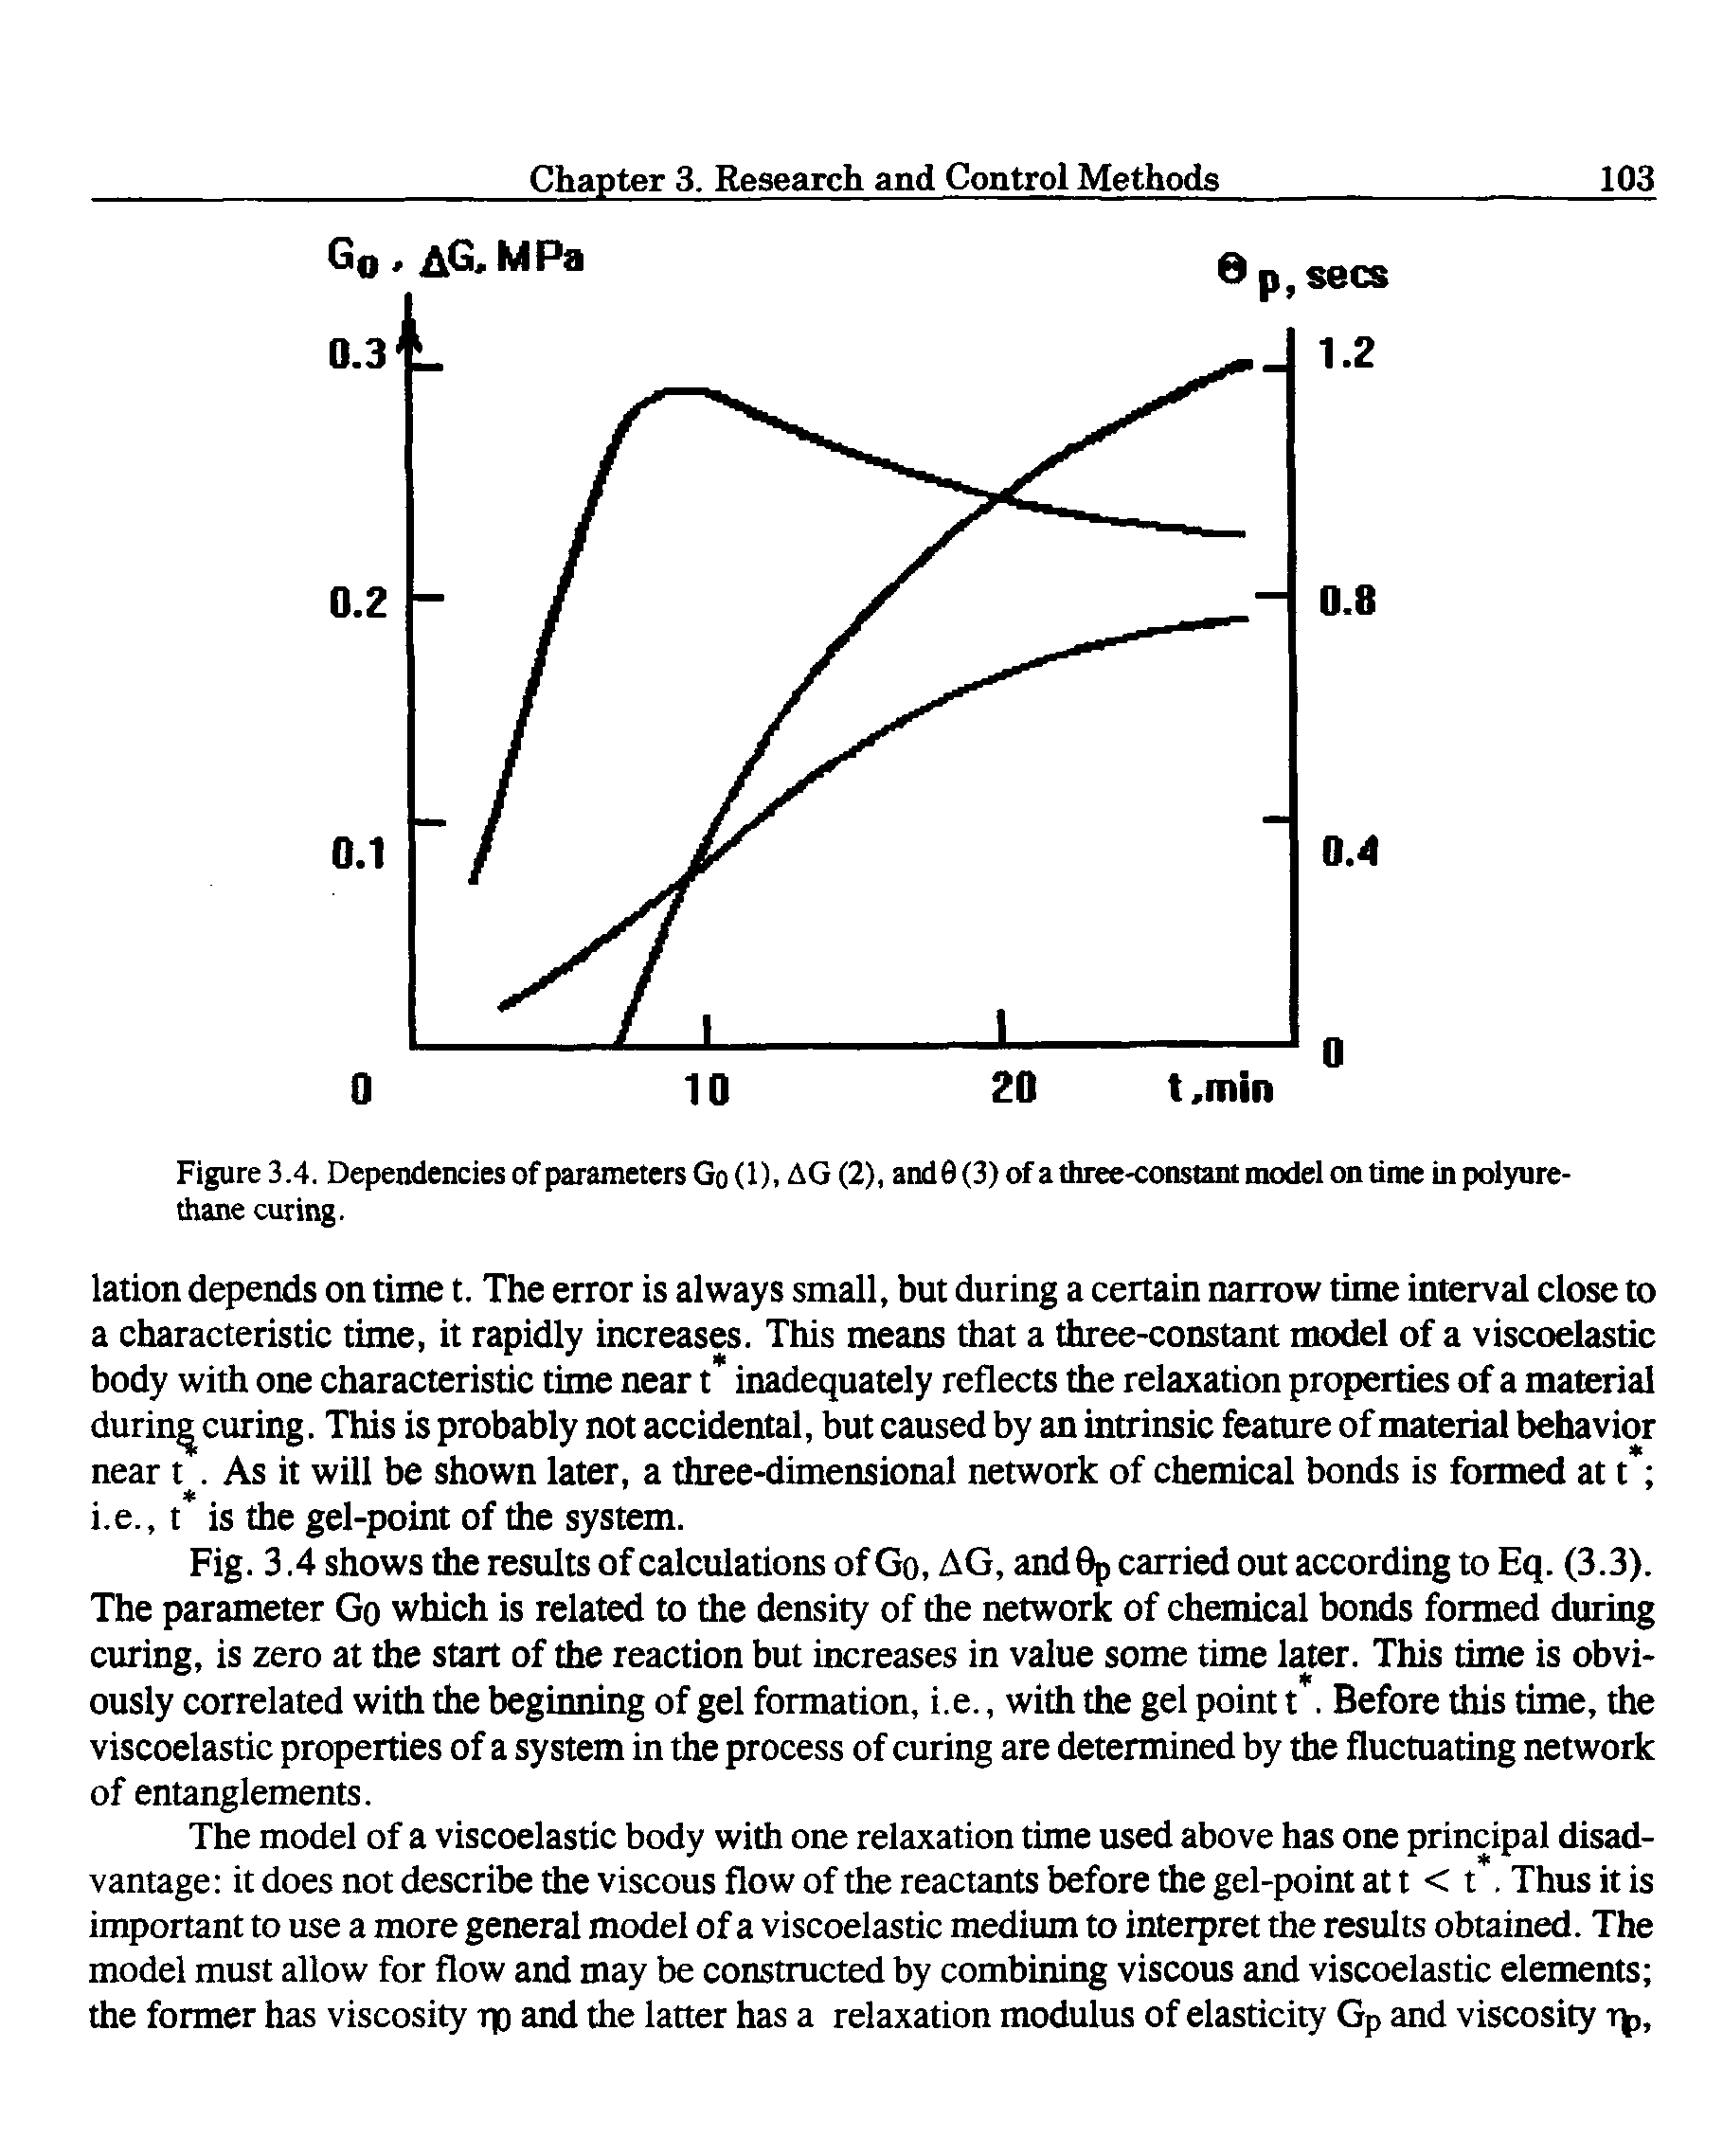 Figure 3.4. Dependencies of parameters Go (1), AG (2), and0 (3) of a three-constant model on time in polyurethane curing.